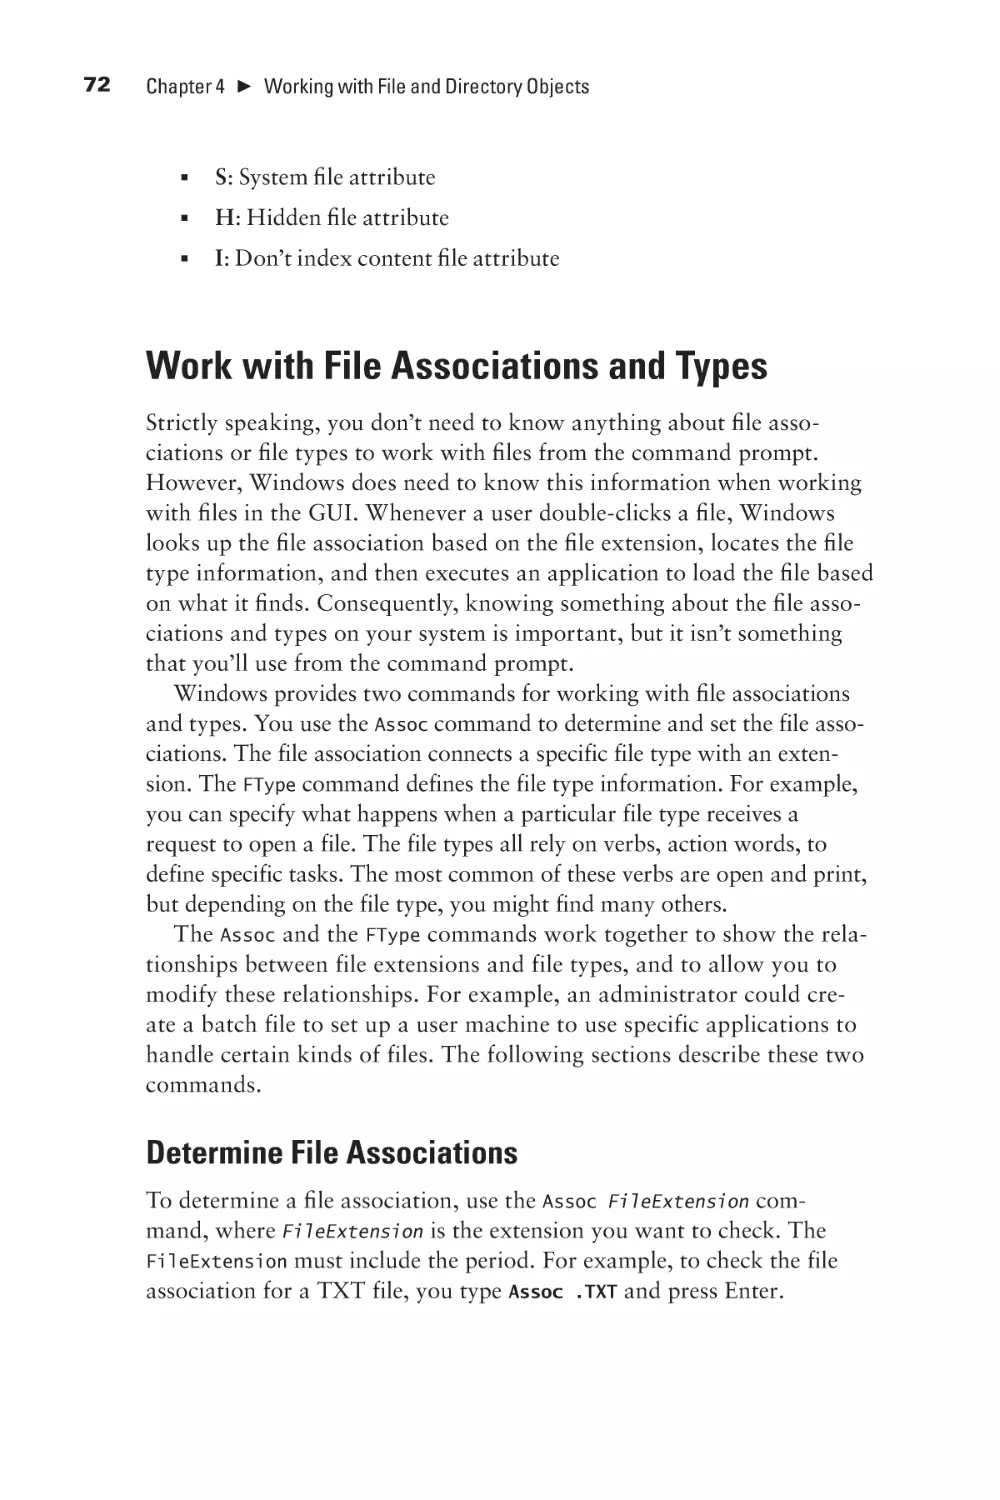 Work with File Associations and Types